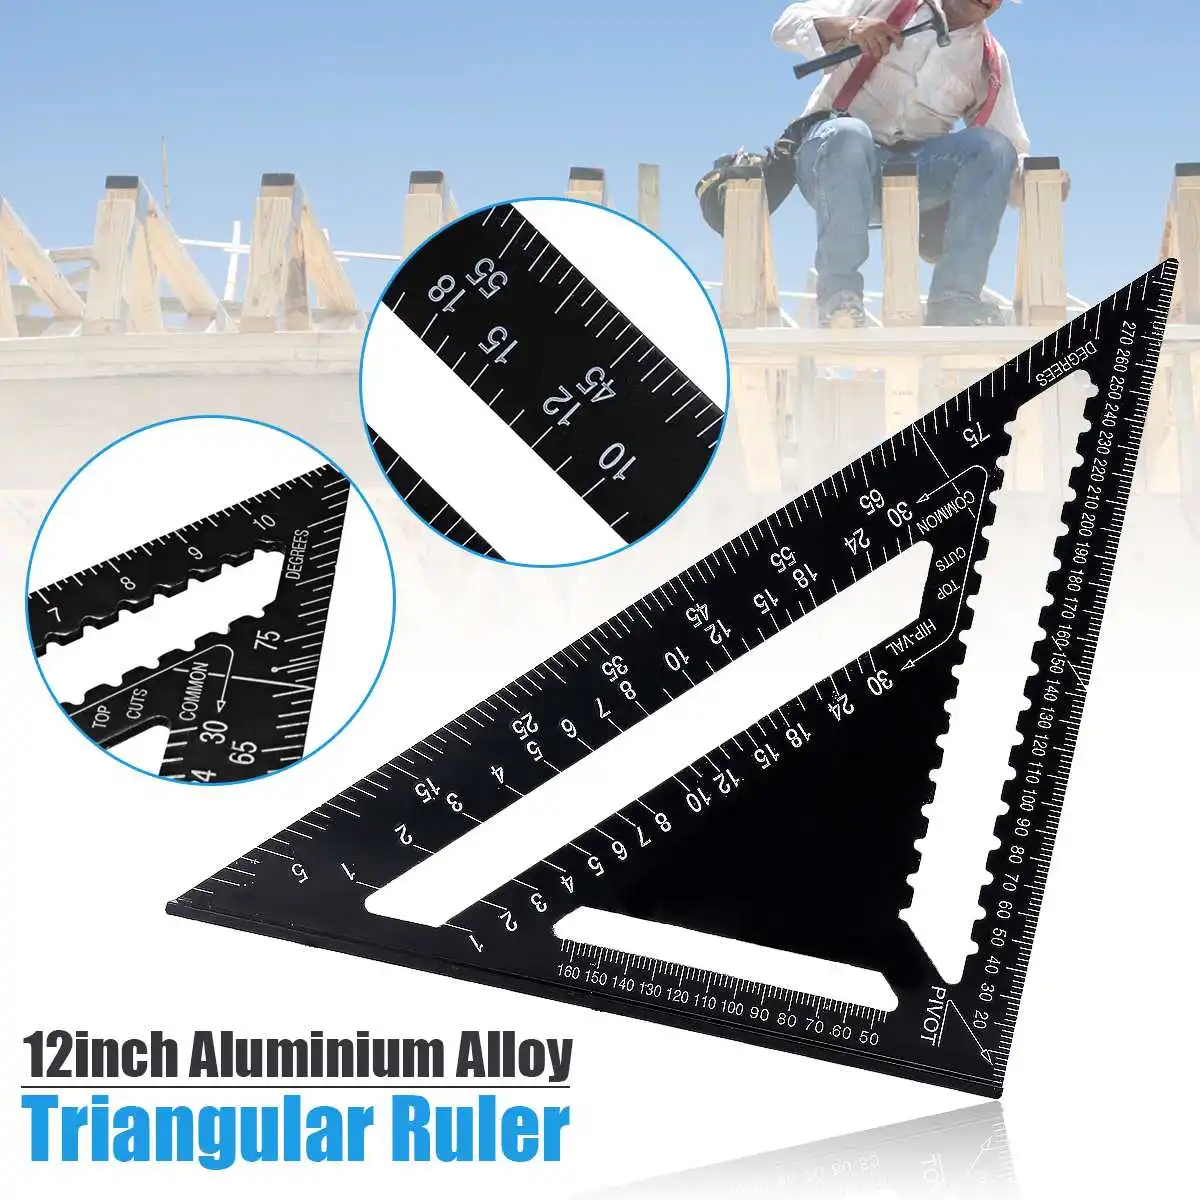 7/12inch Speed Square Metric Aluminum Alloy Triangle Ruler Squares for Measuring Tool Metric Angle Protractor Woodworking Tools digital sound level meter